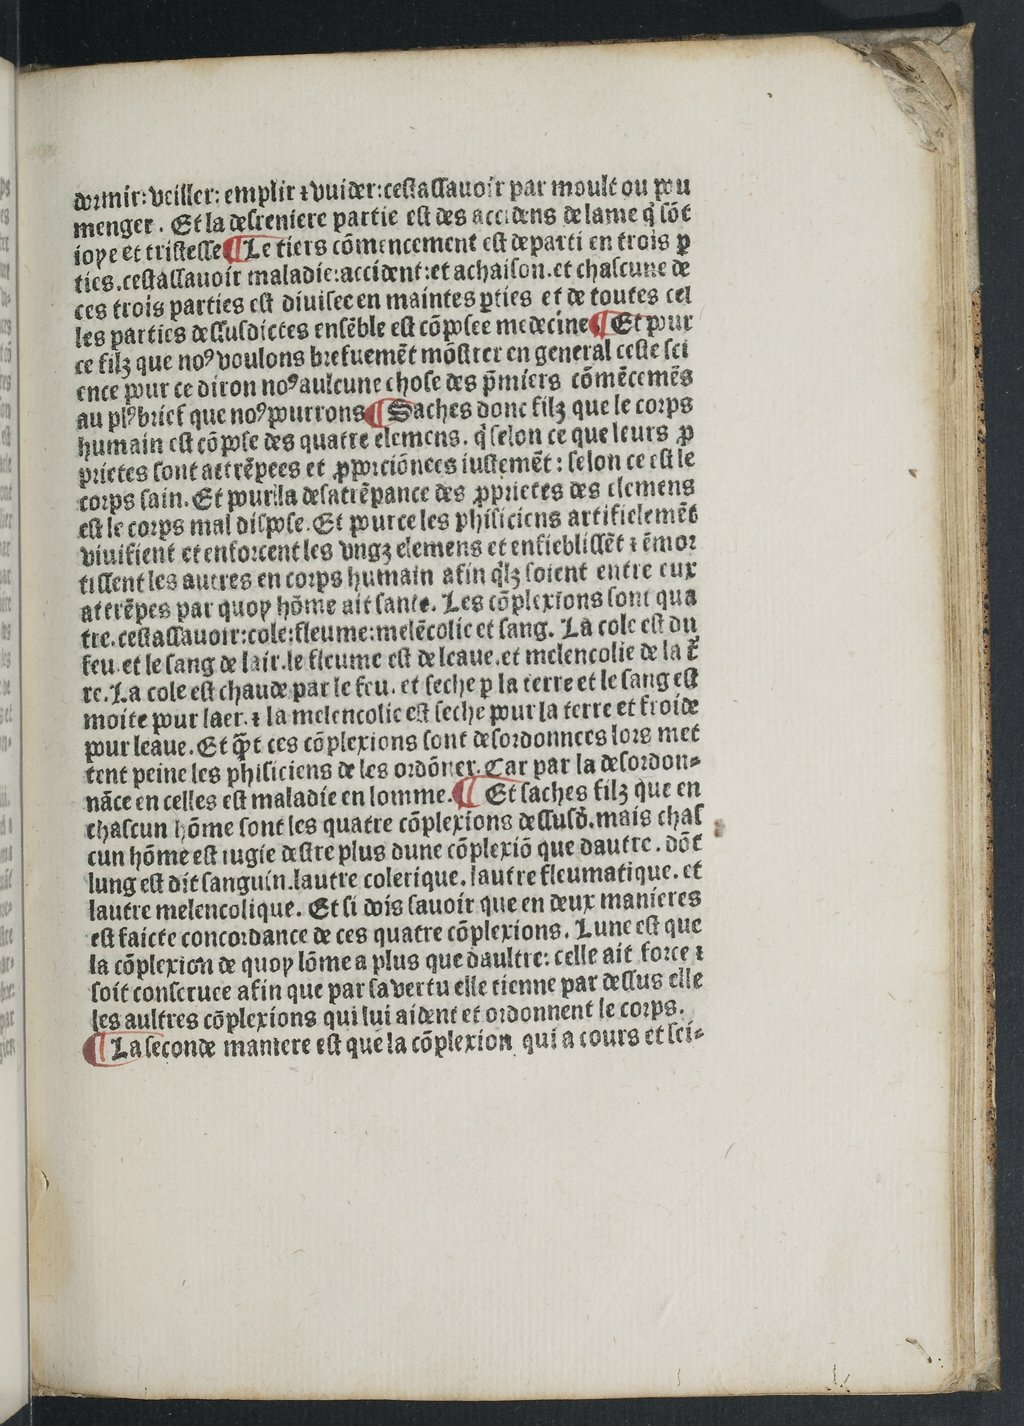 1482 [Antoine Caillaut] Trésor des humains BnF_Page_111.jpg